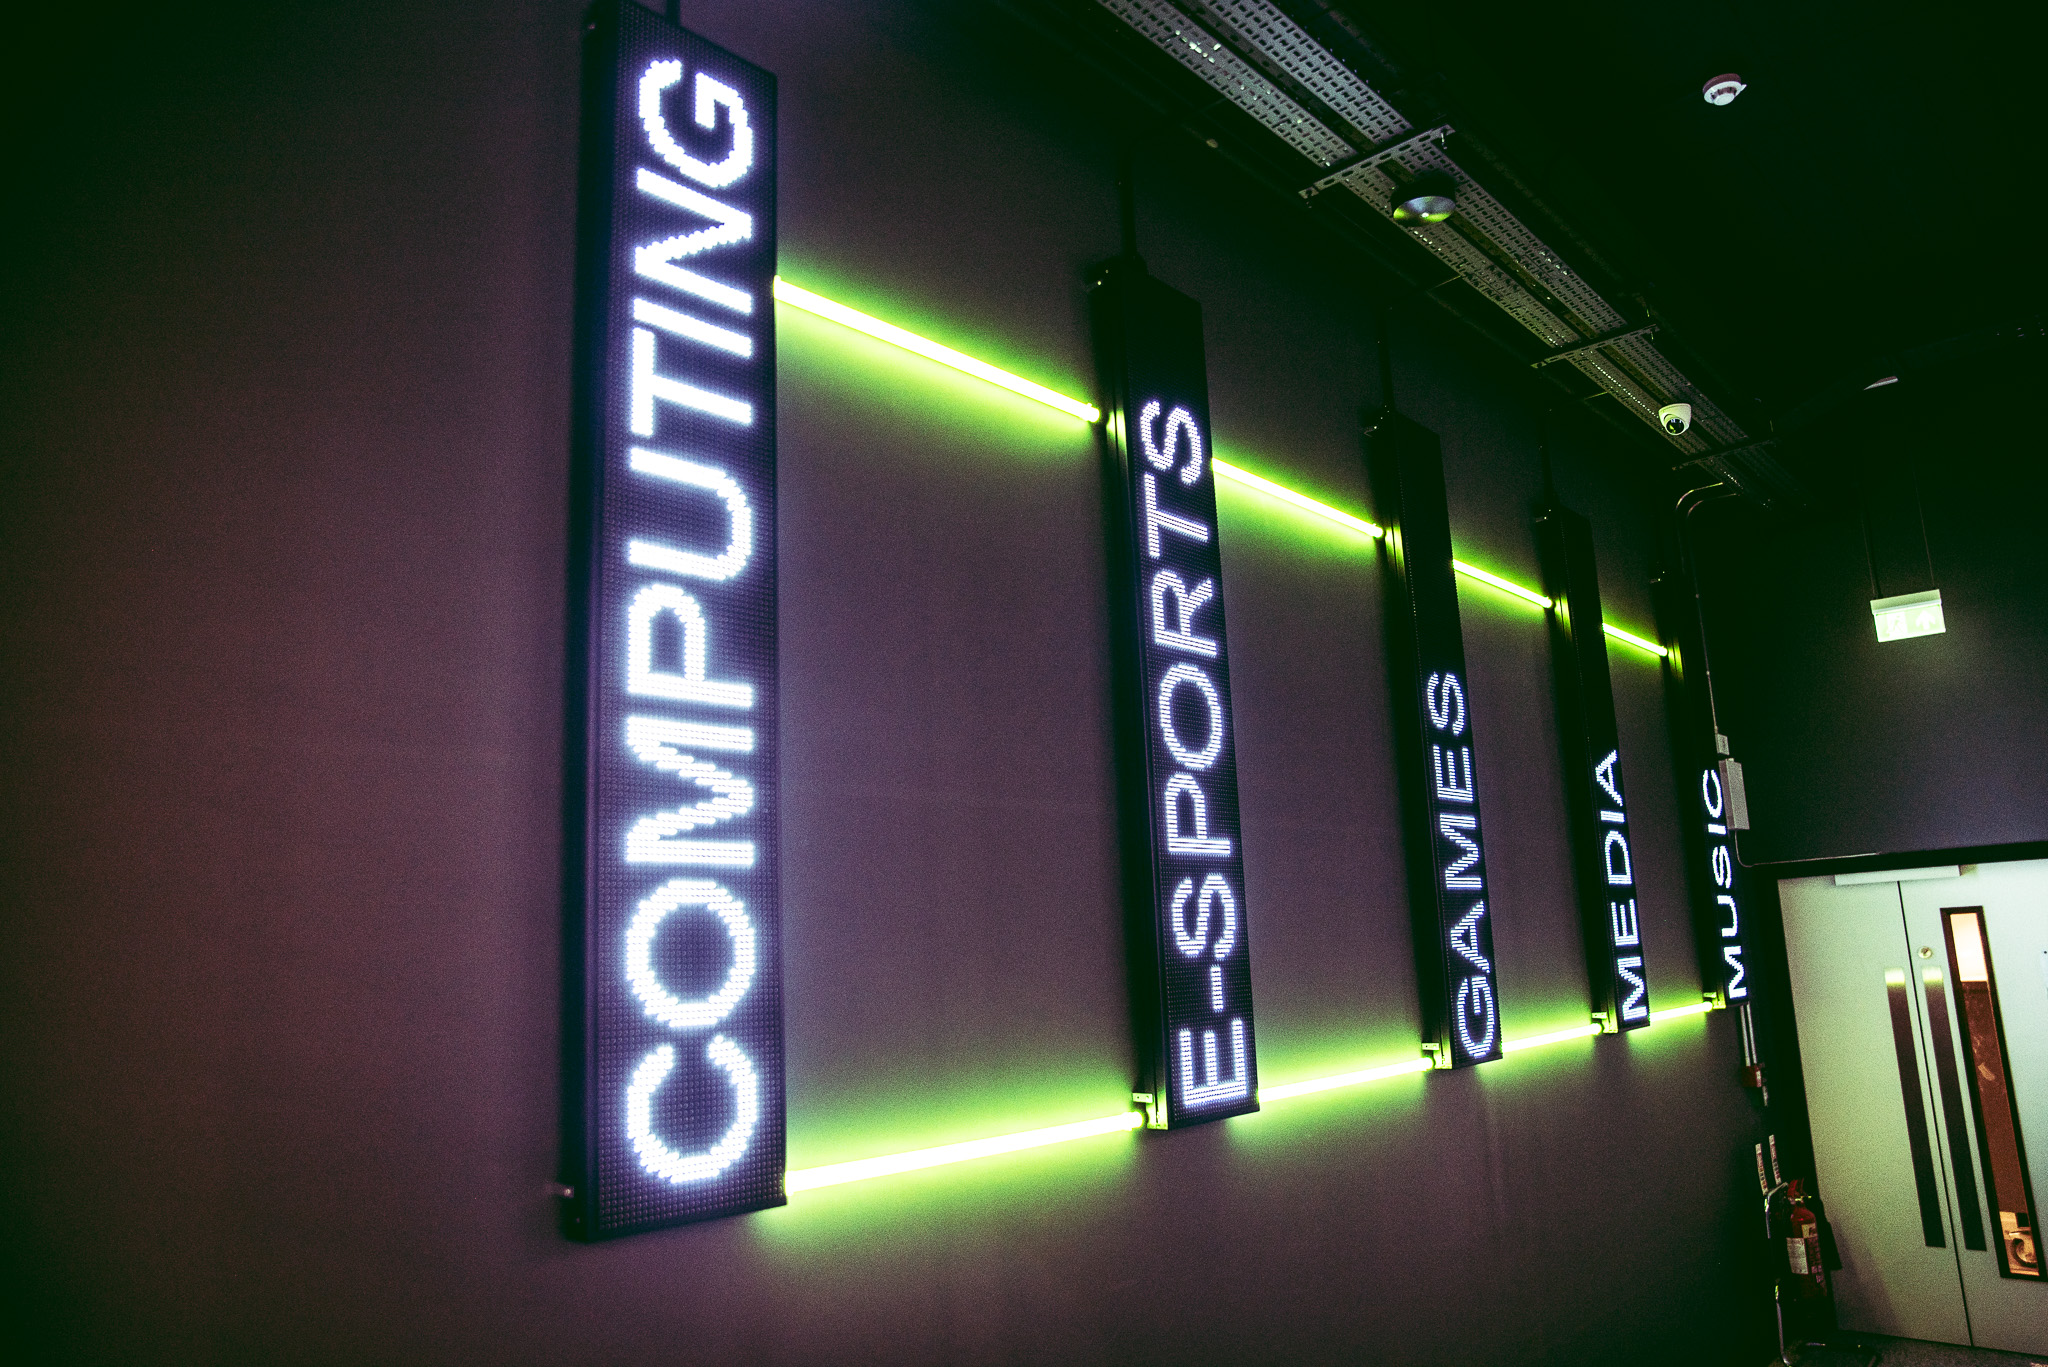 Electrical signage for creative college courses